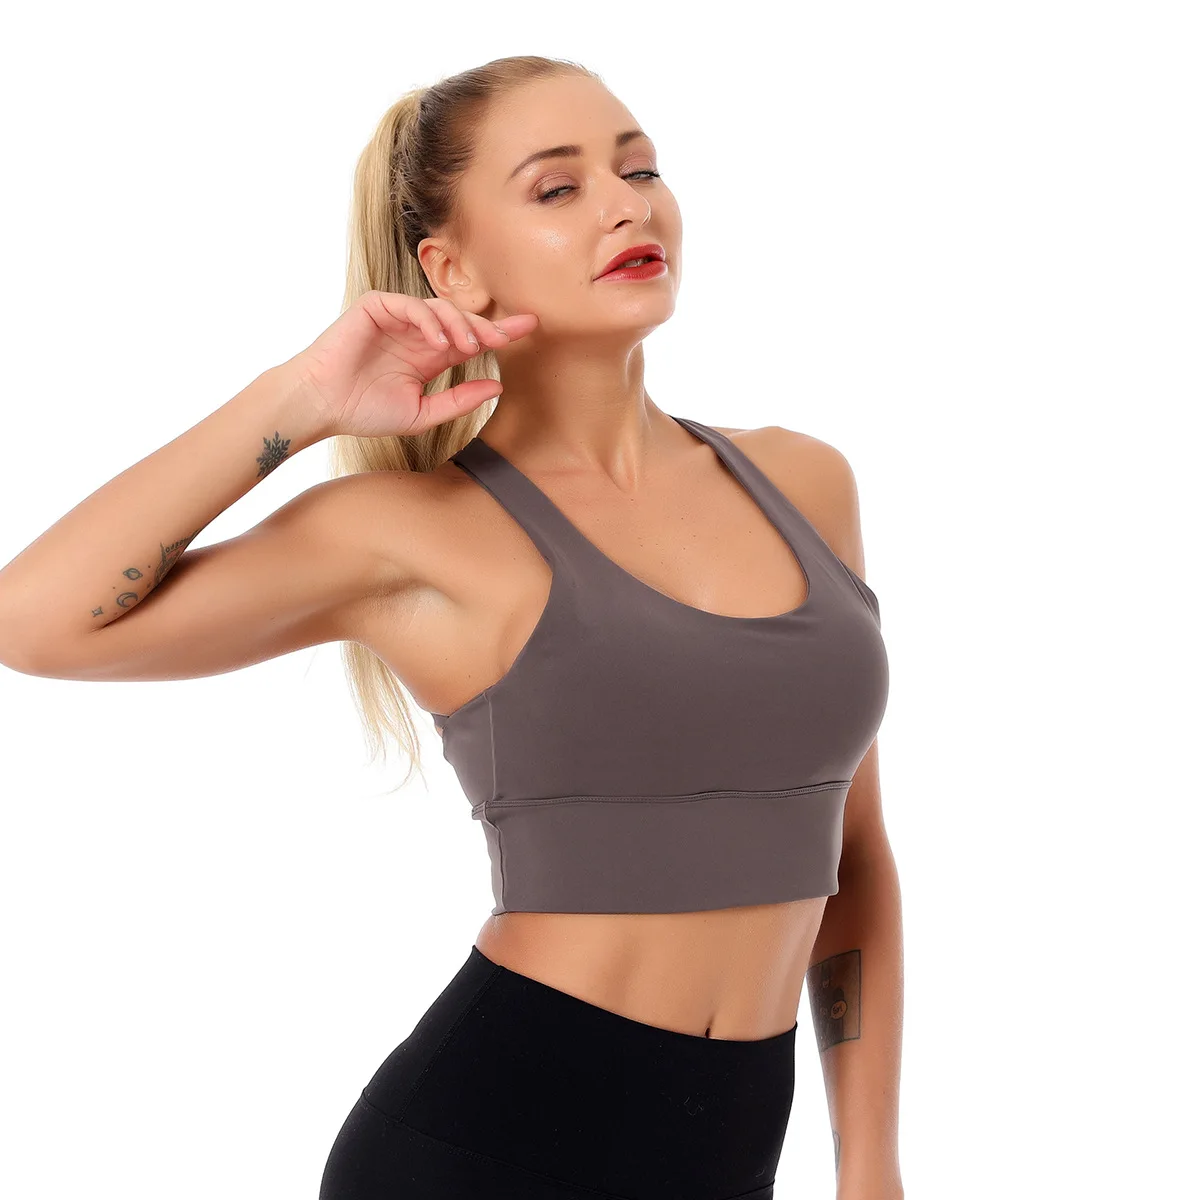 High quality supportive workout wear women